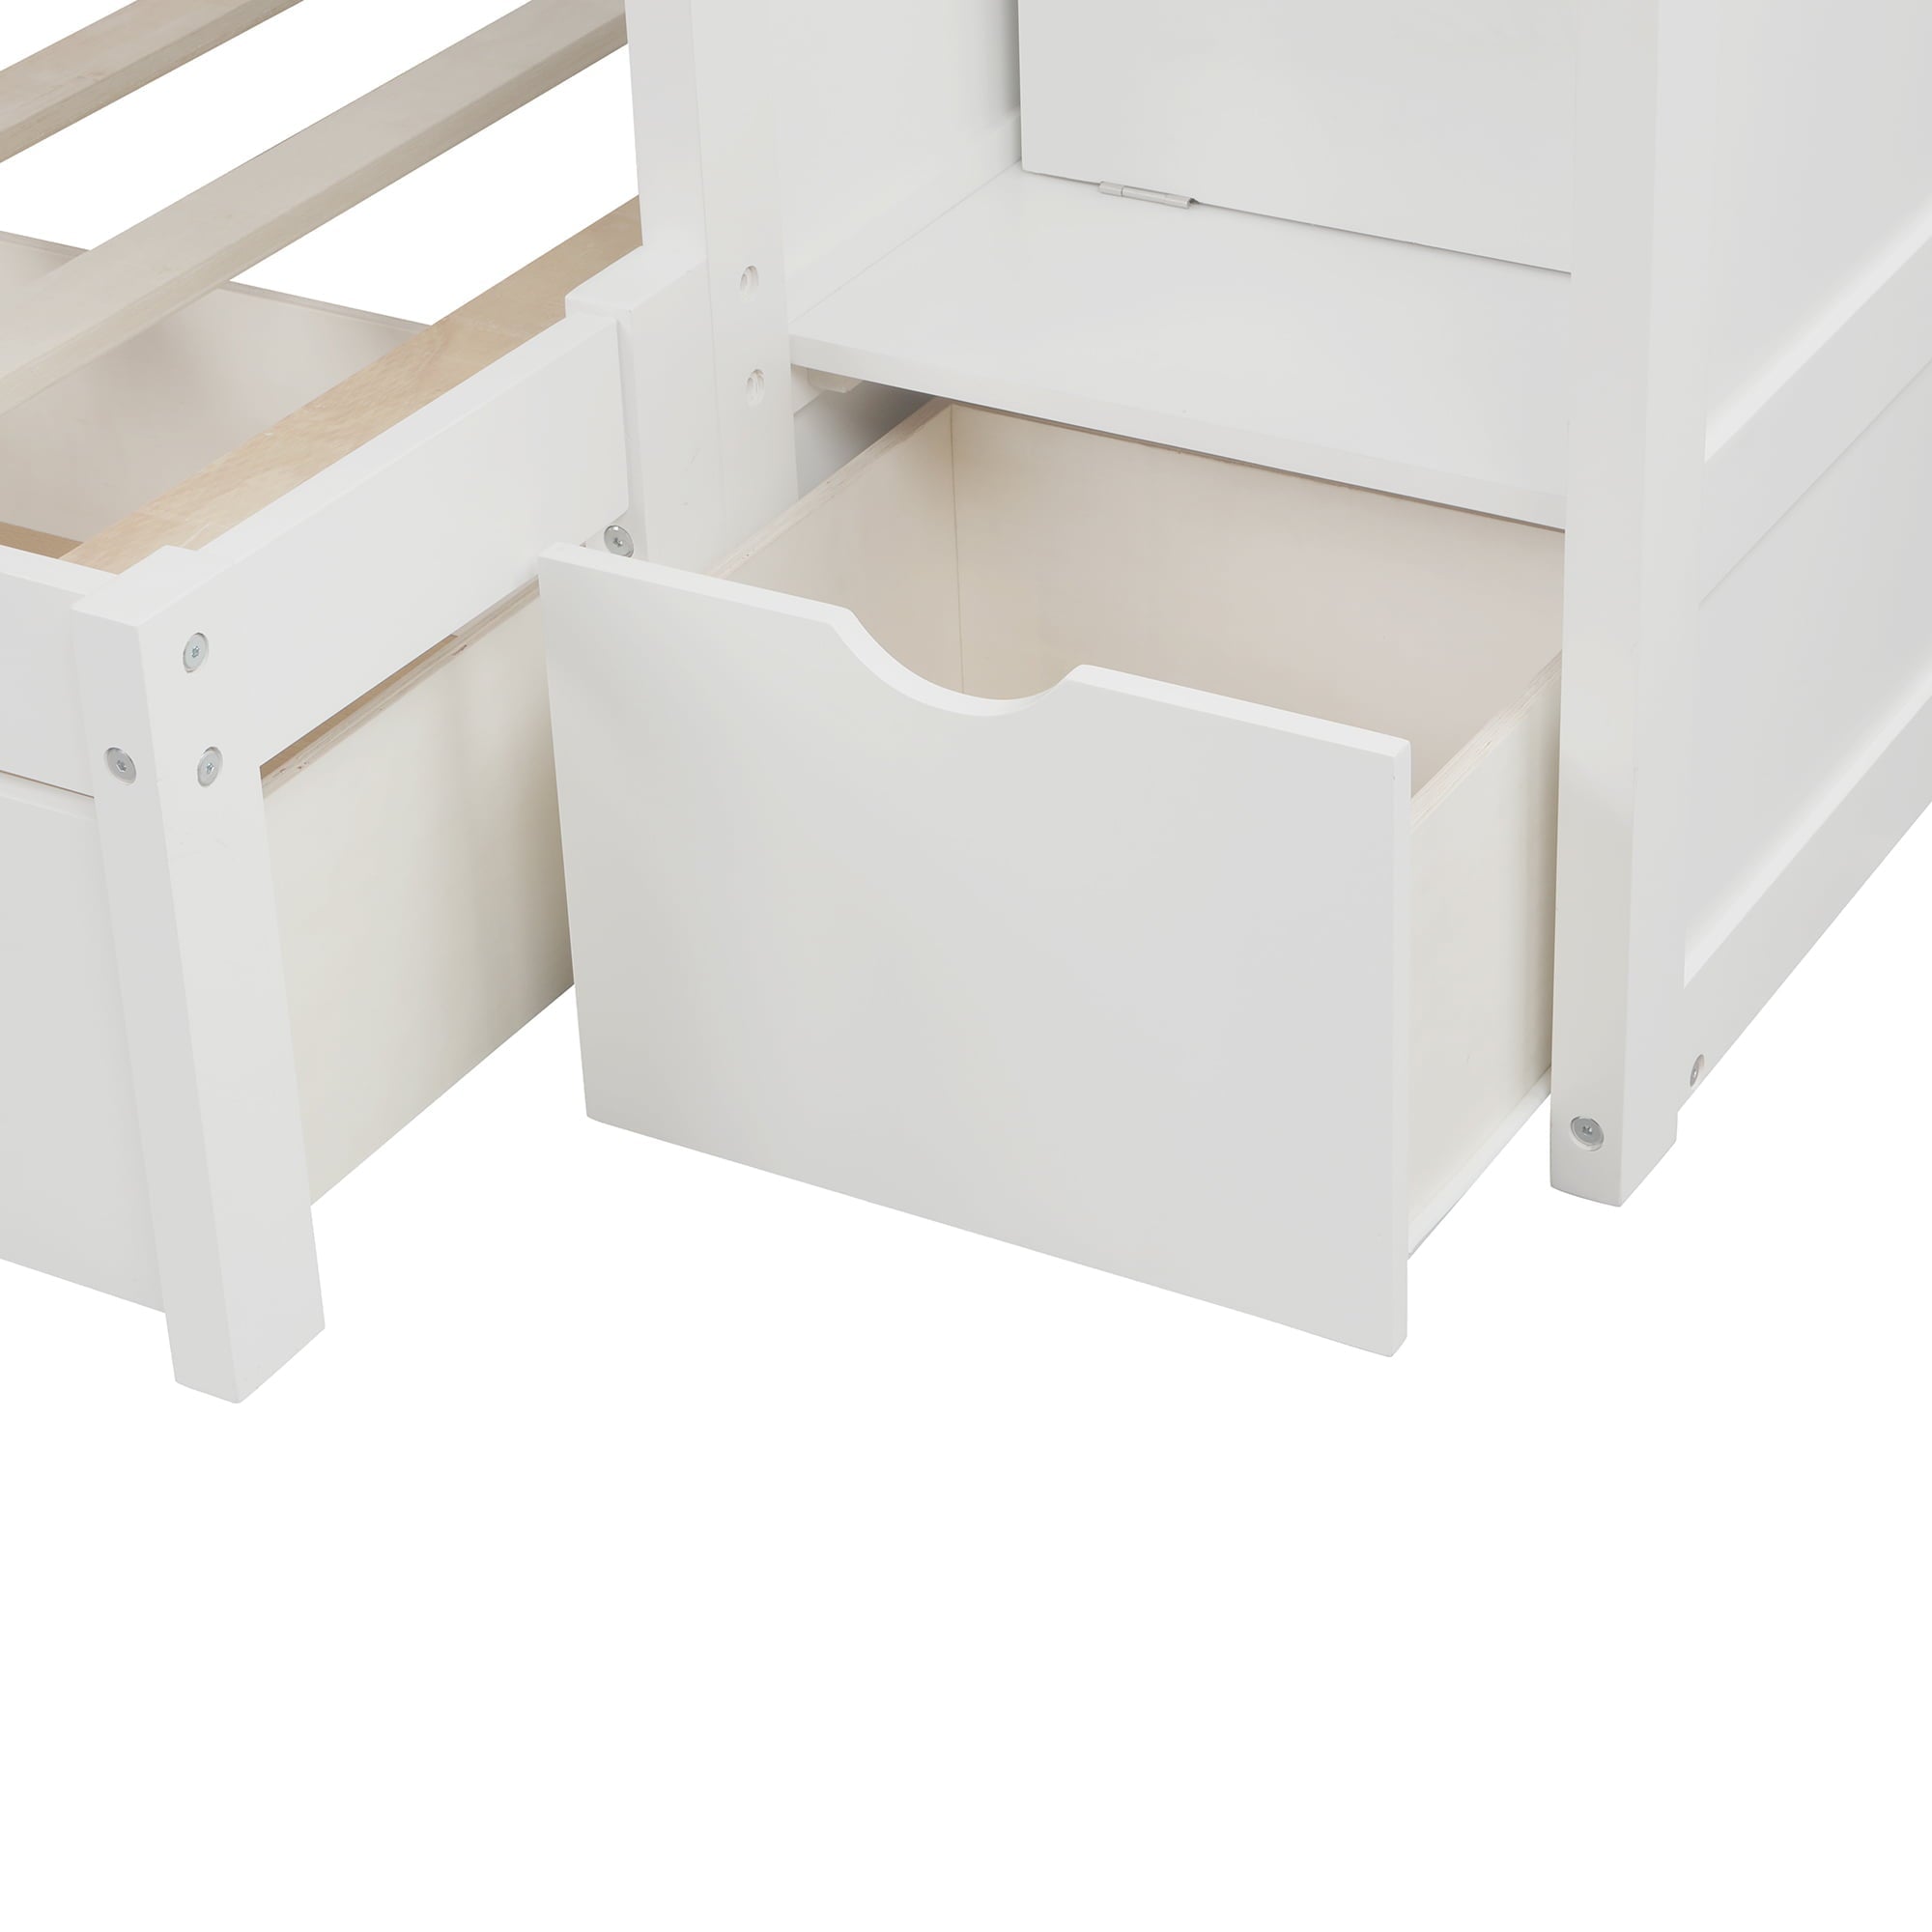 Modern Twin Bunk Bed with Drawer and Cabinet for Kids Bedroom, White